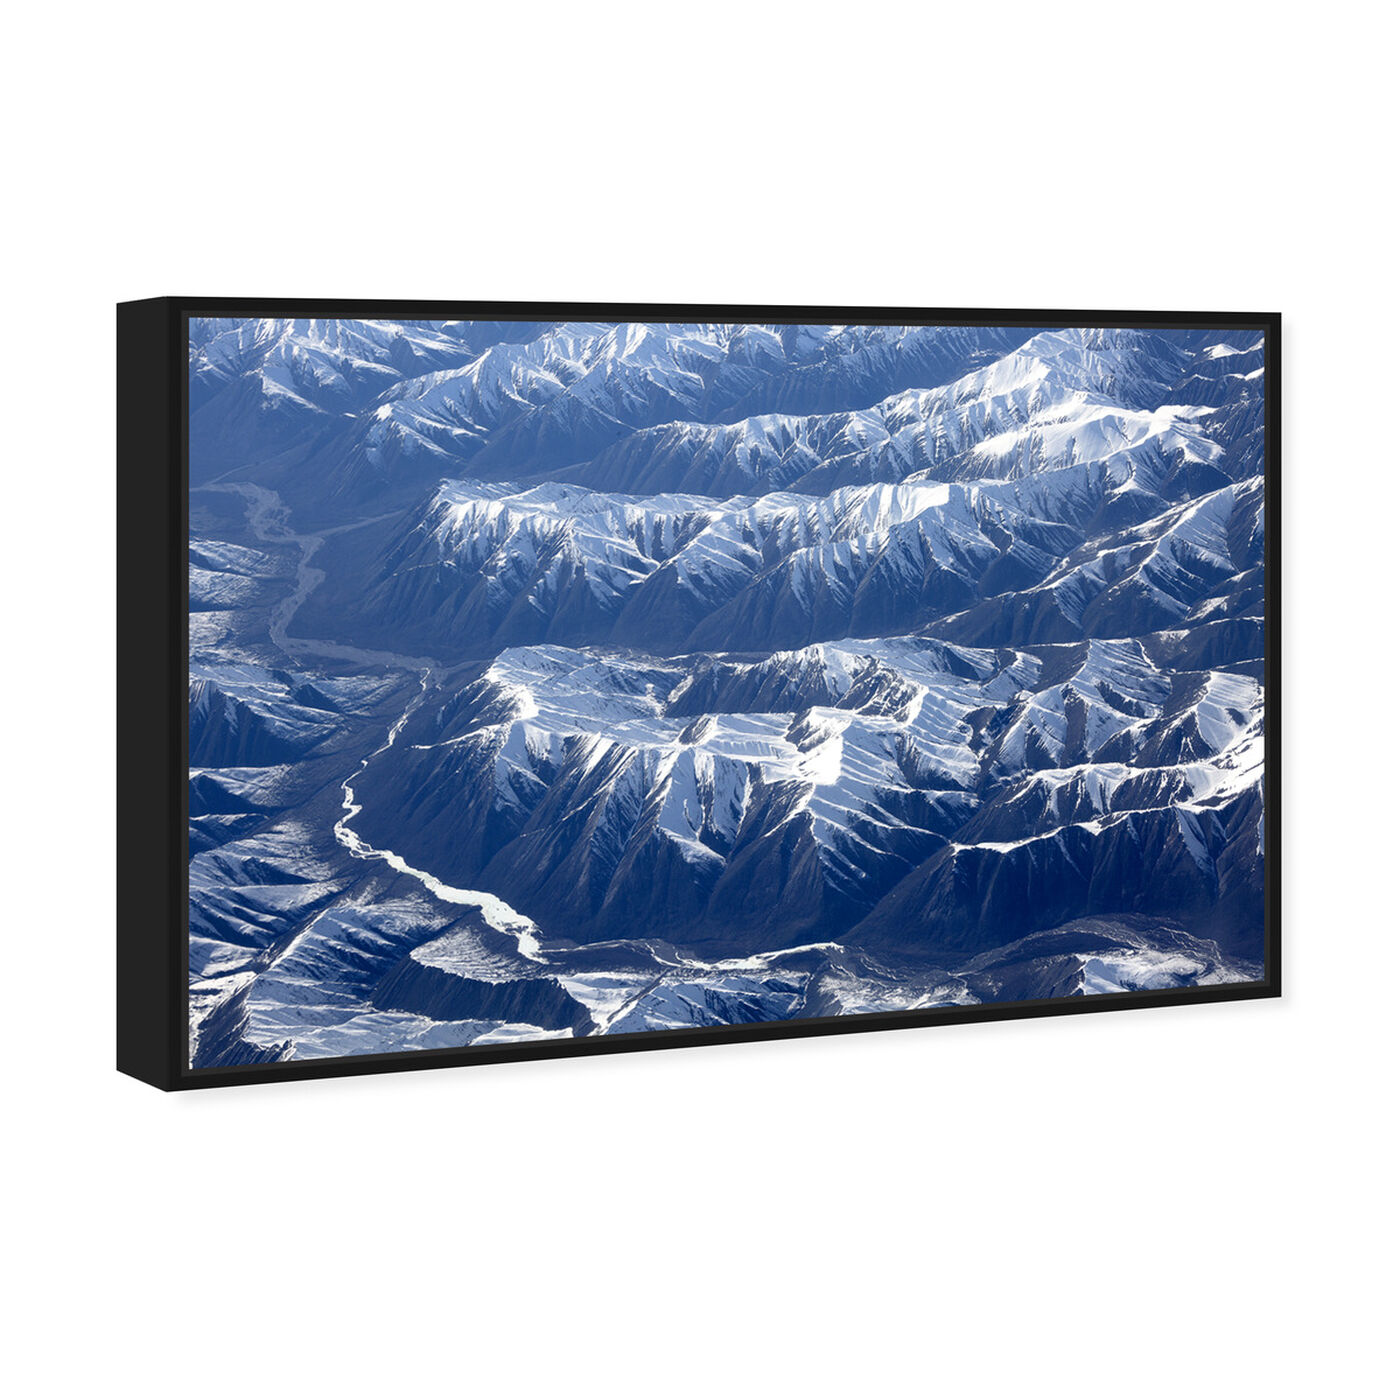 Angled view of Curro Cardenal - Aero View IV featuring nature and landscape and mountains art.